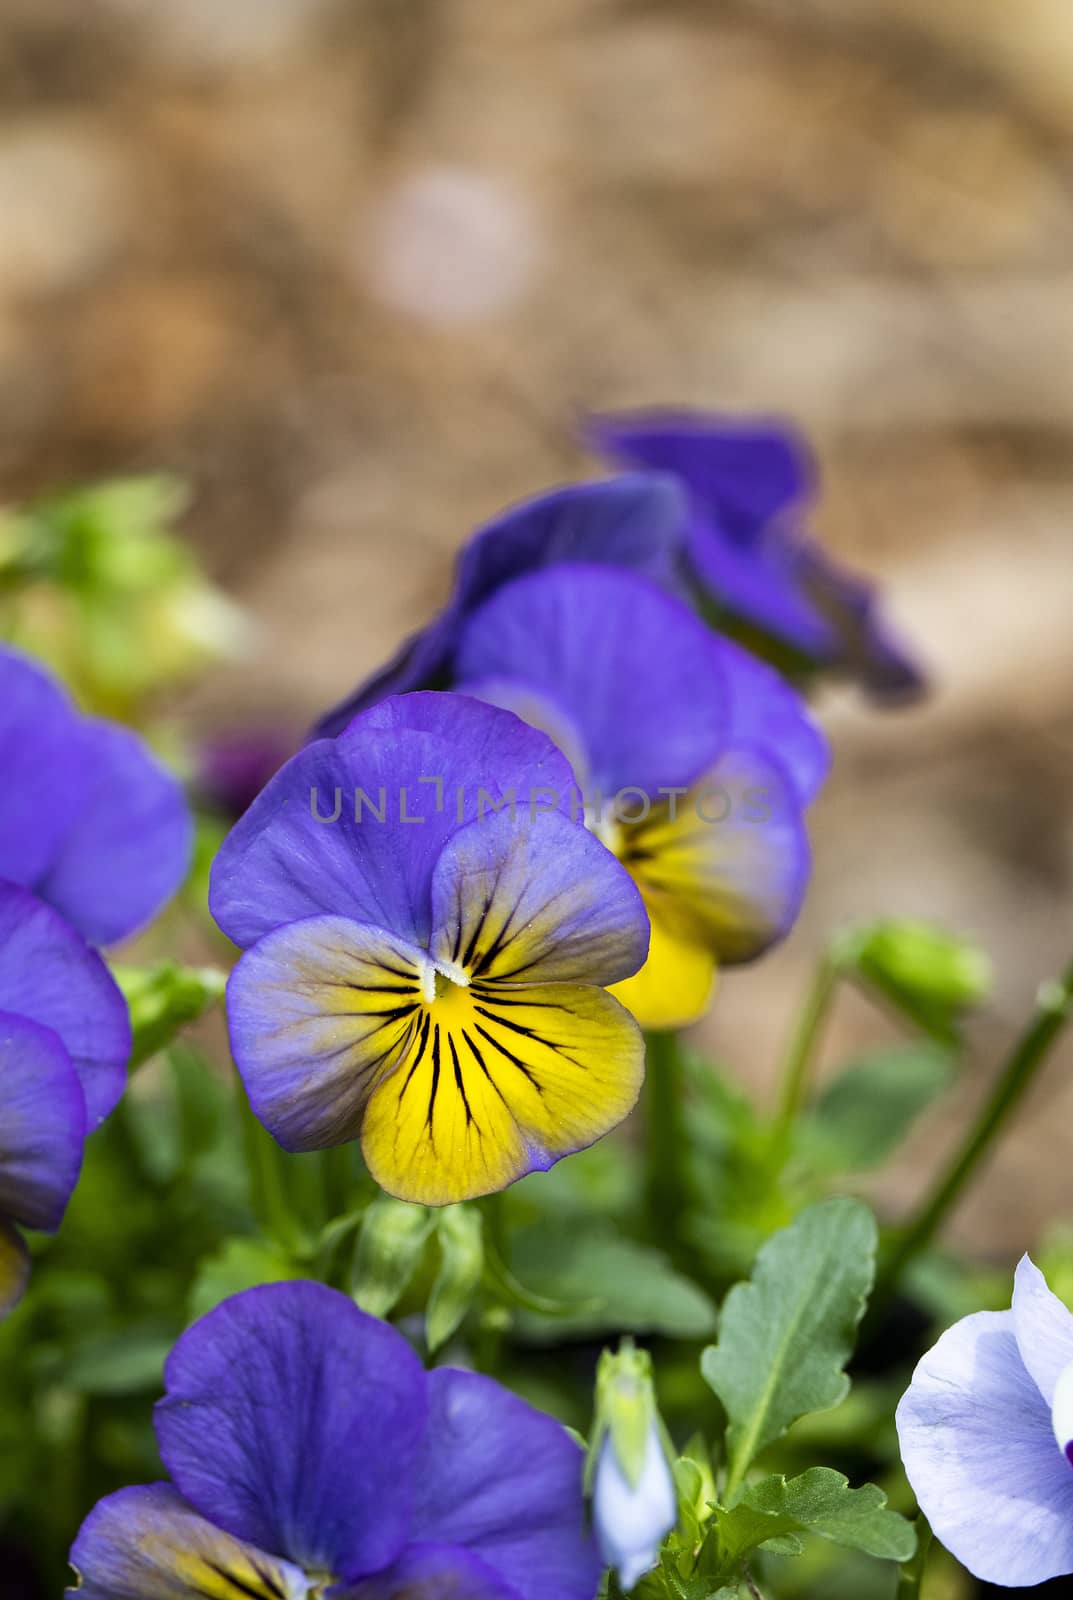 View of purple and yellow pansy blooms.